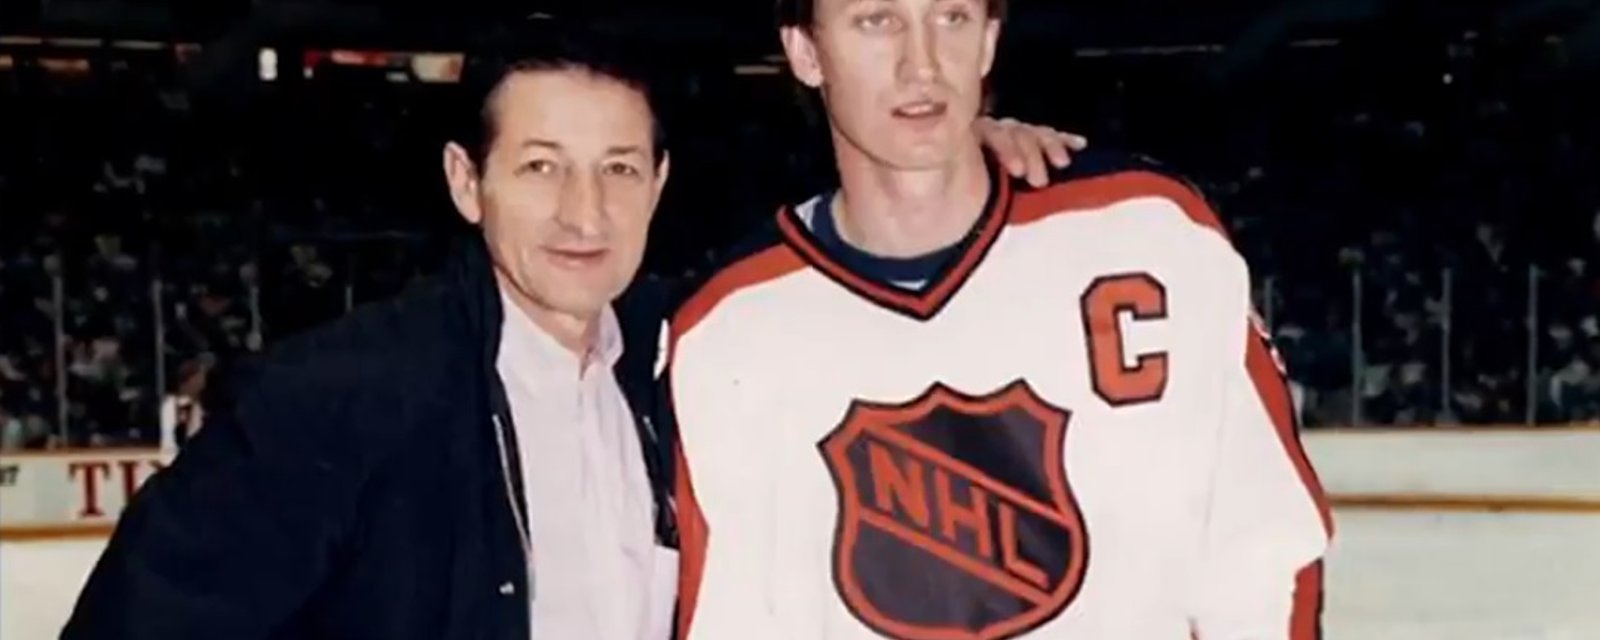 Wayne Gretzky sends his father Walter a beautiful message for Father's Day.